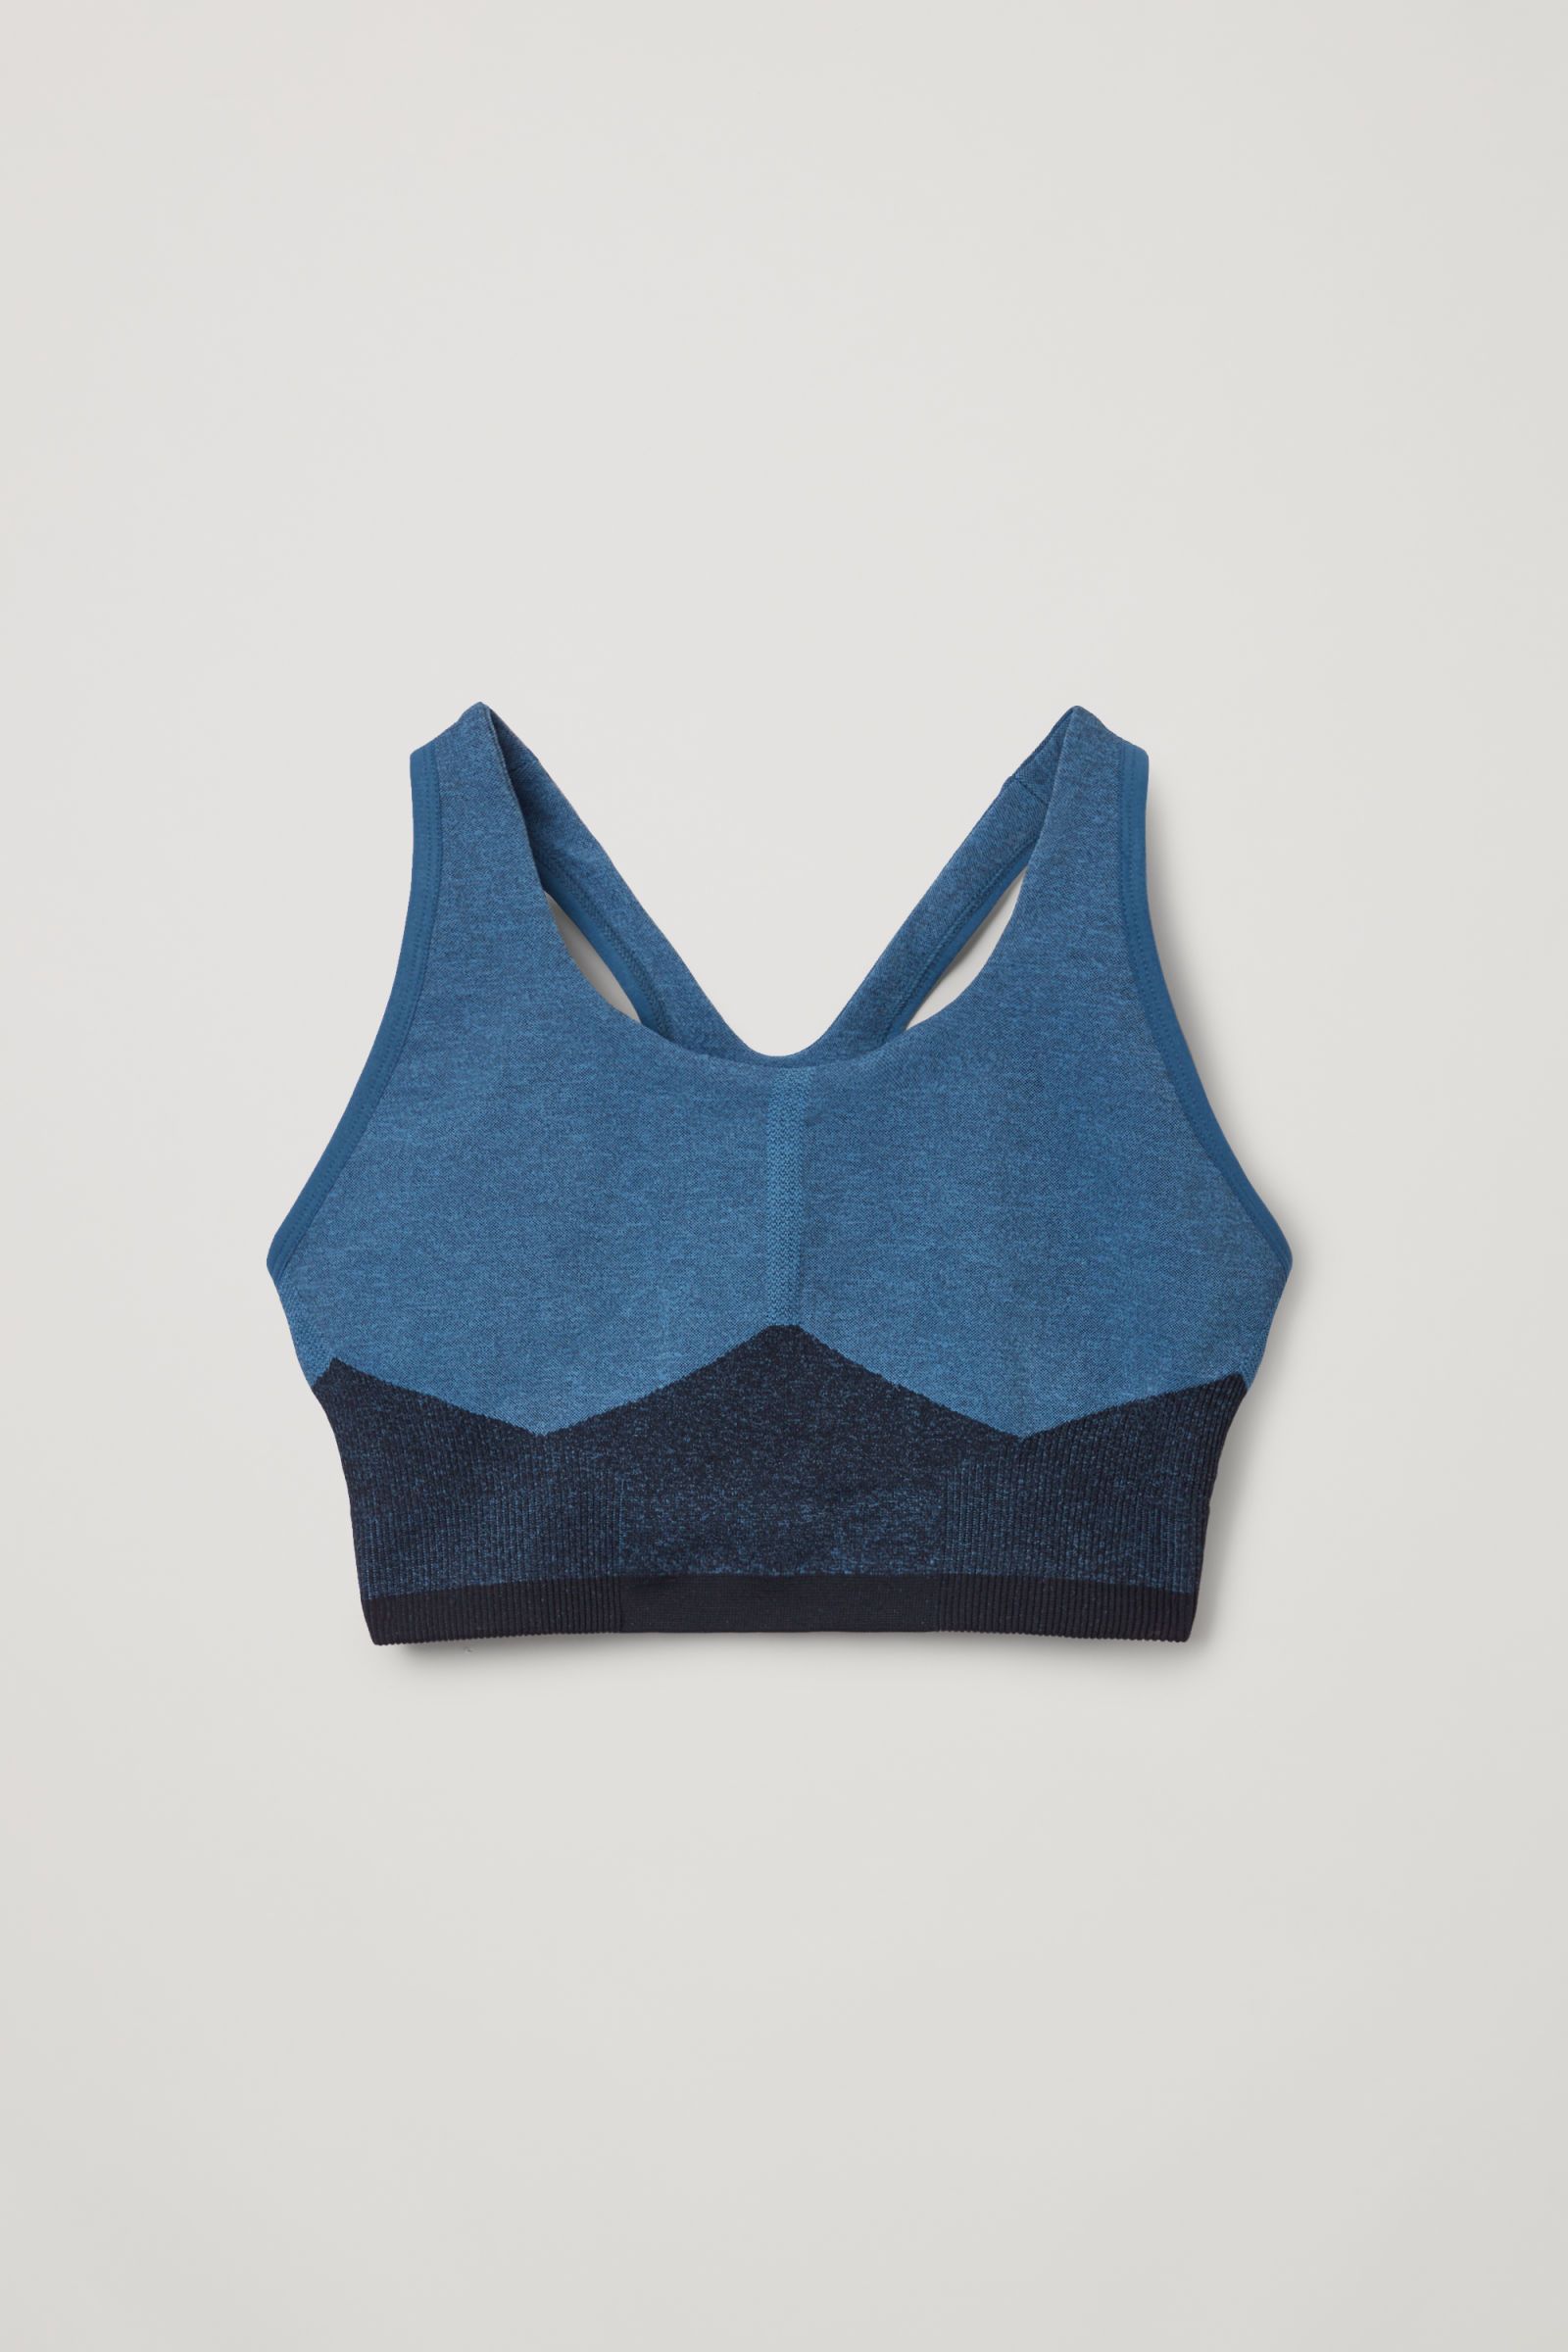 COS activewear: 5 Buys to Snap Up Now